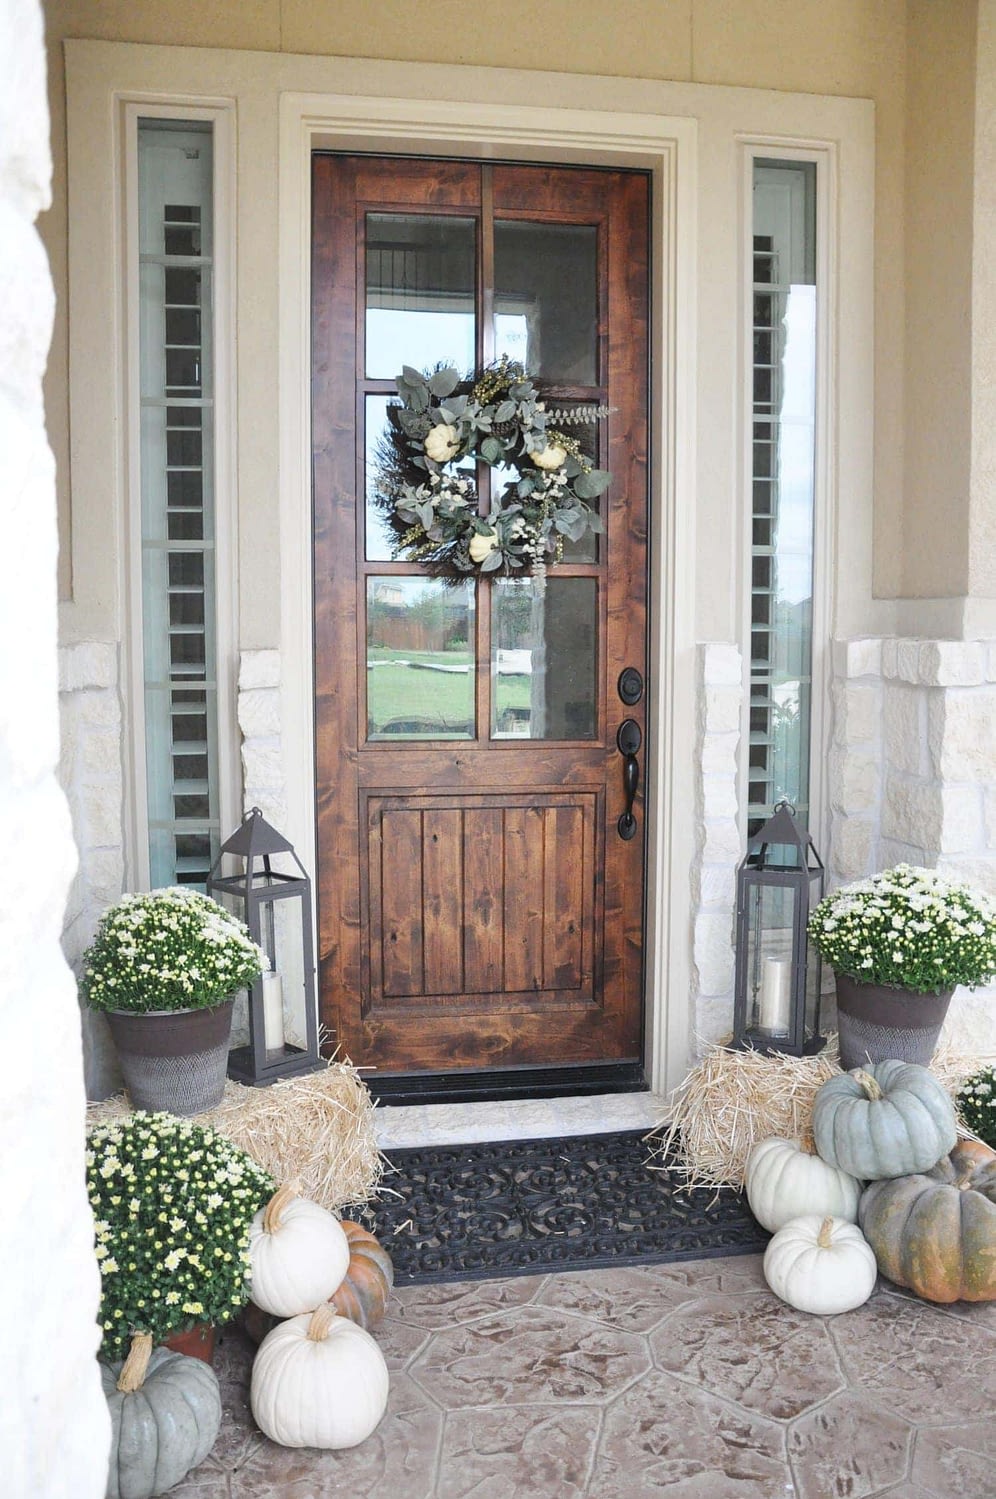 Fall front porch ideas using hay bales, lanterns and neutral colored pumpkins